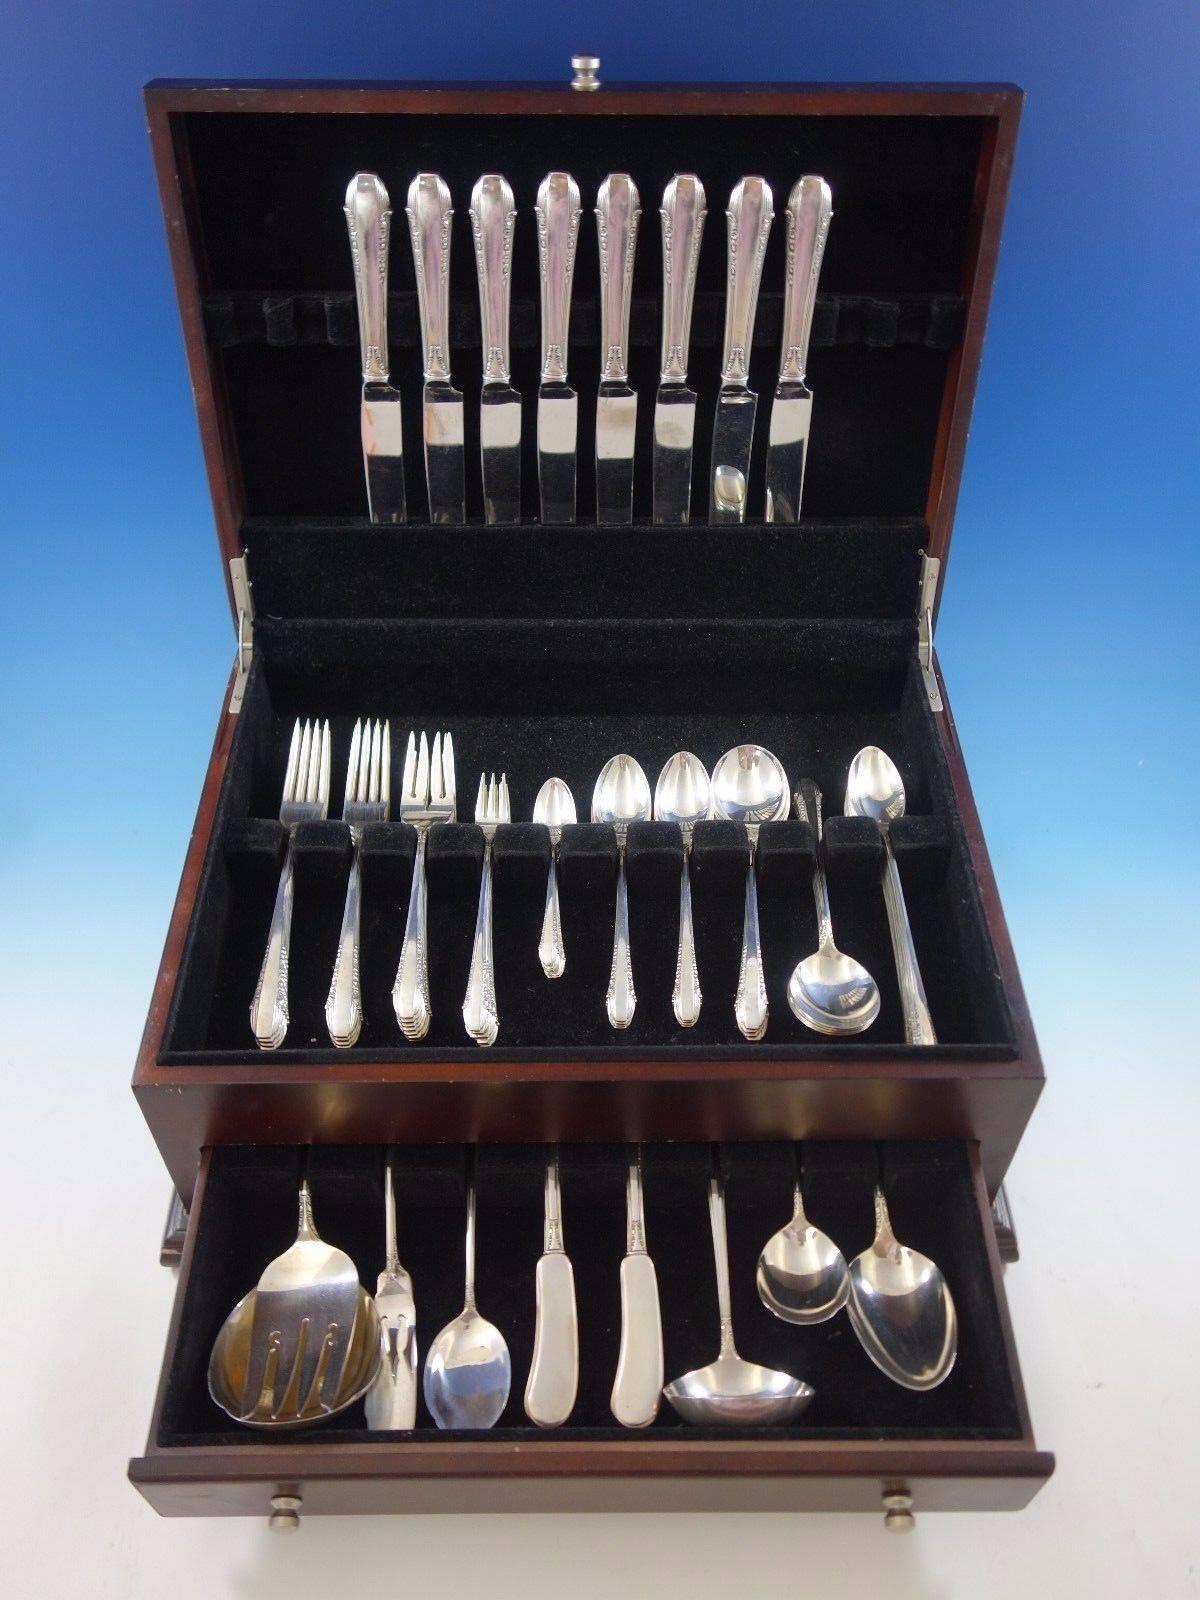 Enchantress by International sterling silver flatware set, 80 pieces. This set includes: 

eight knives, 8 3/4